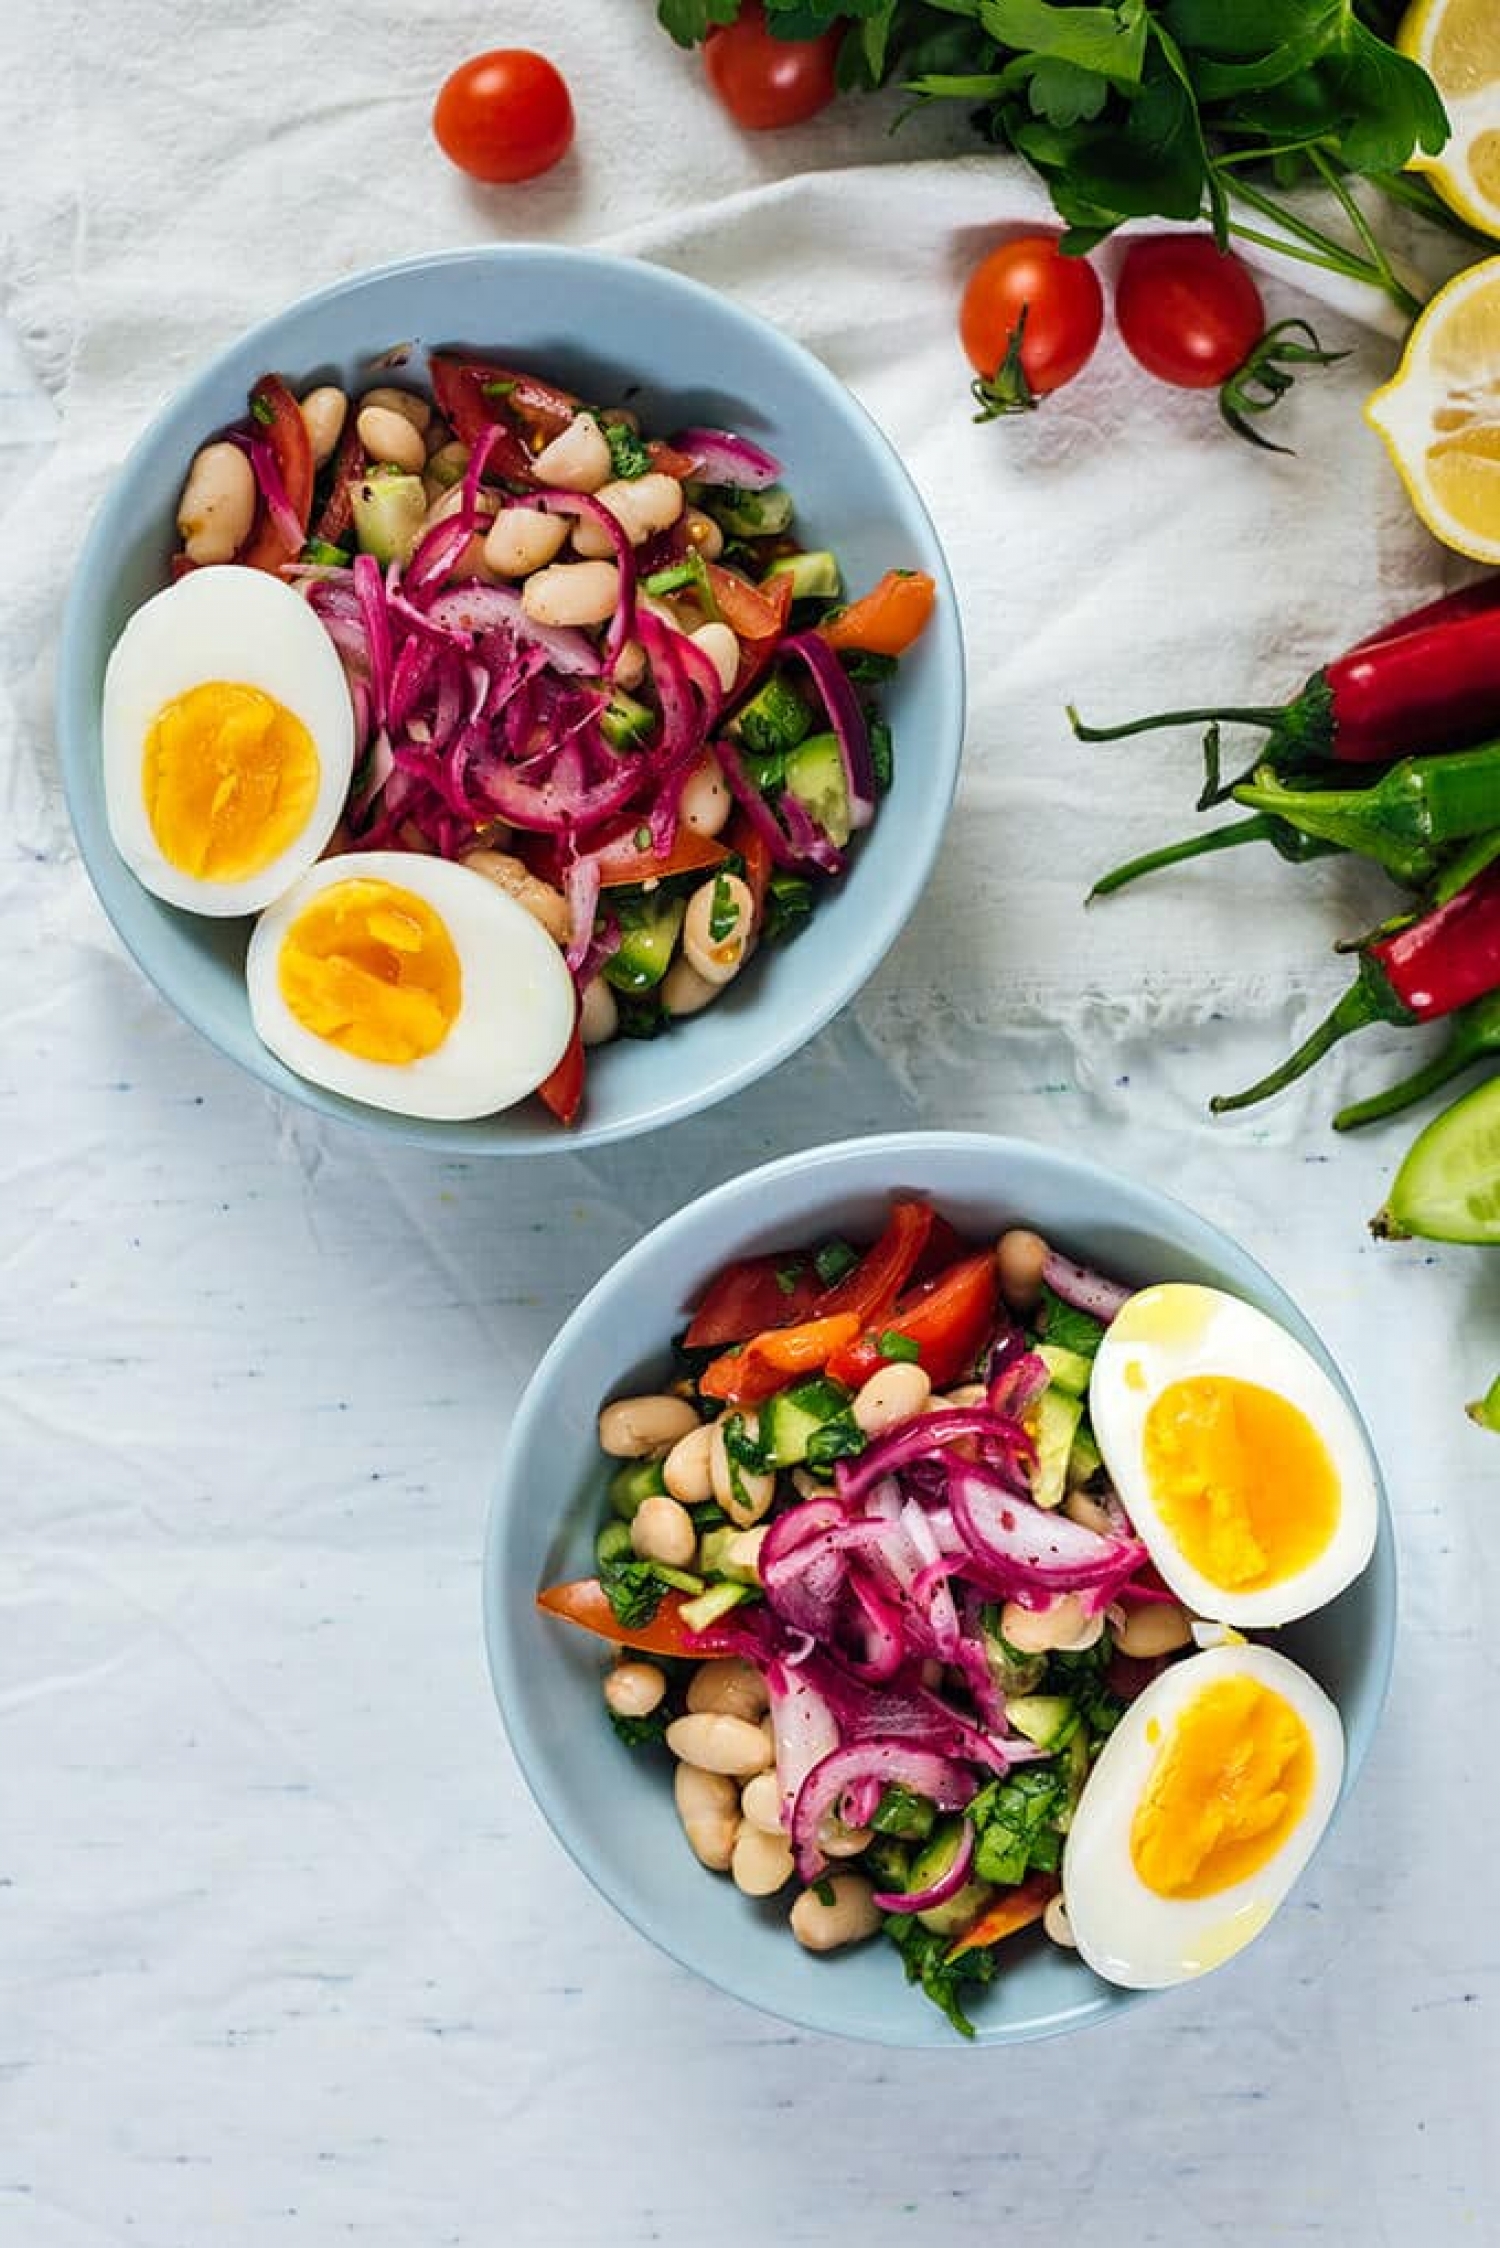 <p>Middle Eastern countries like Turkey have the most amazing array of salads, and this <em>piyaz</em>, or white bean salad, is no exception. Made with chopped vegetables, herbs, hard-boiled eggs, pickled onions and a sumac-seasoned dressing, it's bursting with fresh flavors and healthy protein. <a href="https://www.giverecipe.com/turkish-white-bean-salad/" rel="noopener">Get the recipe here.</a></p>